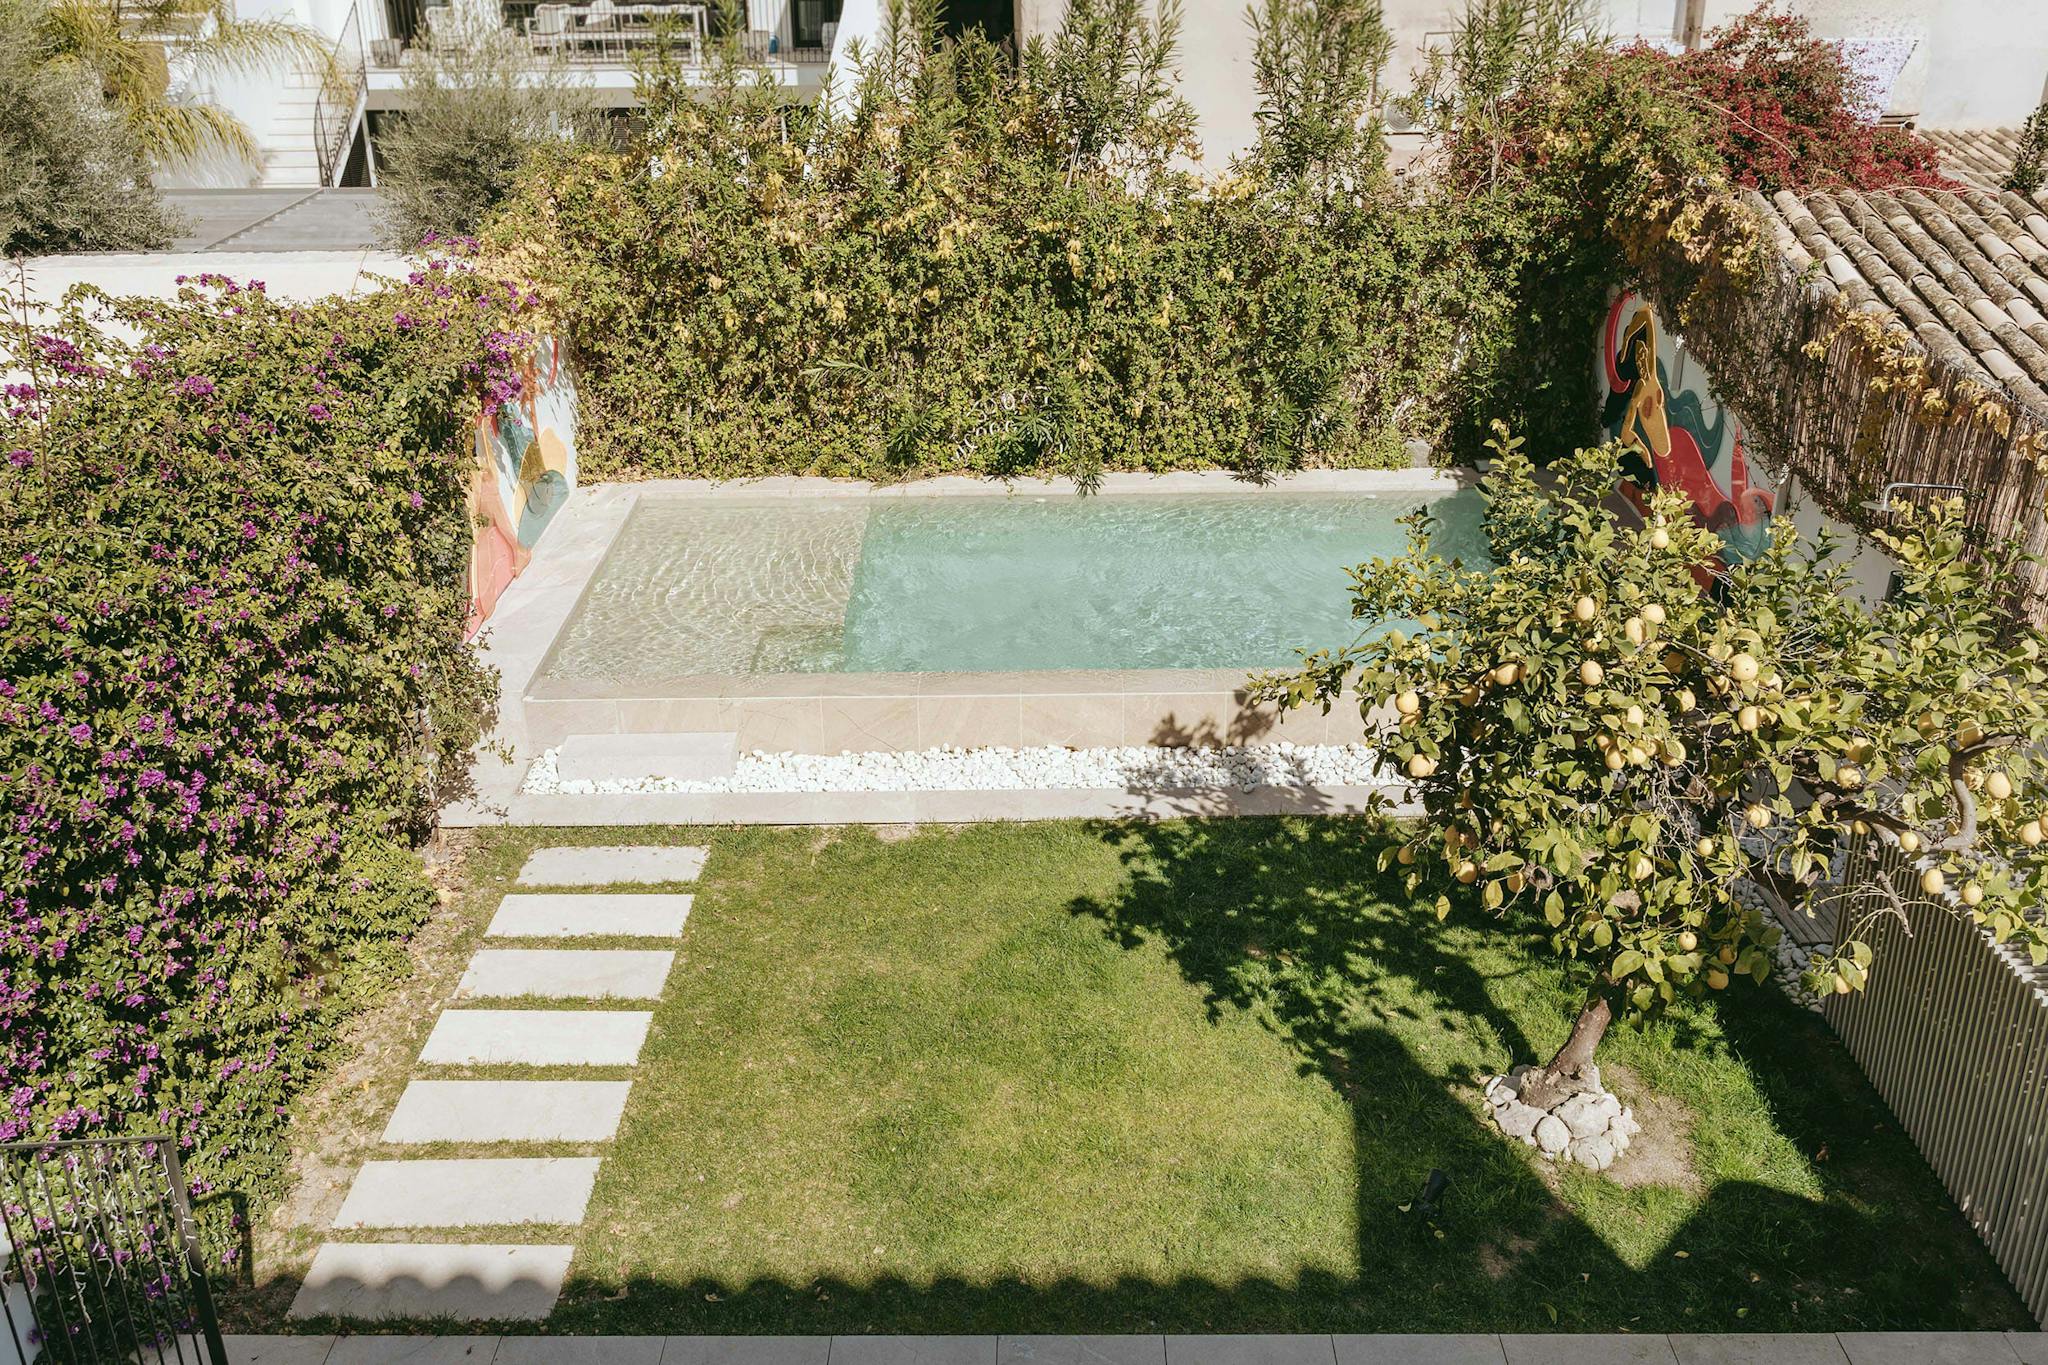 The image features a large, well-maintained backyard with a swimming pool, a patio, a garden, and a house.